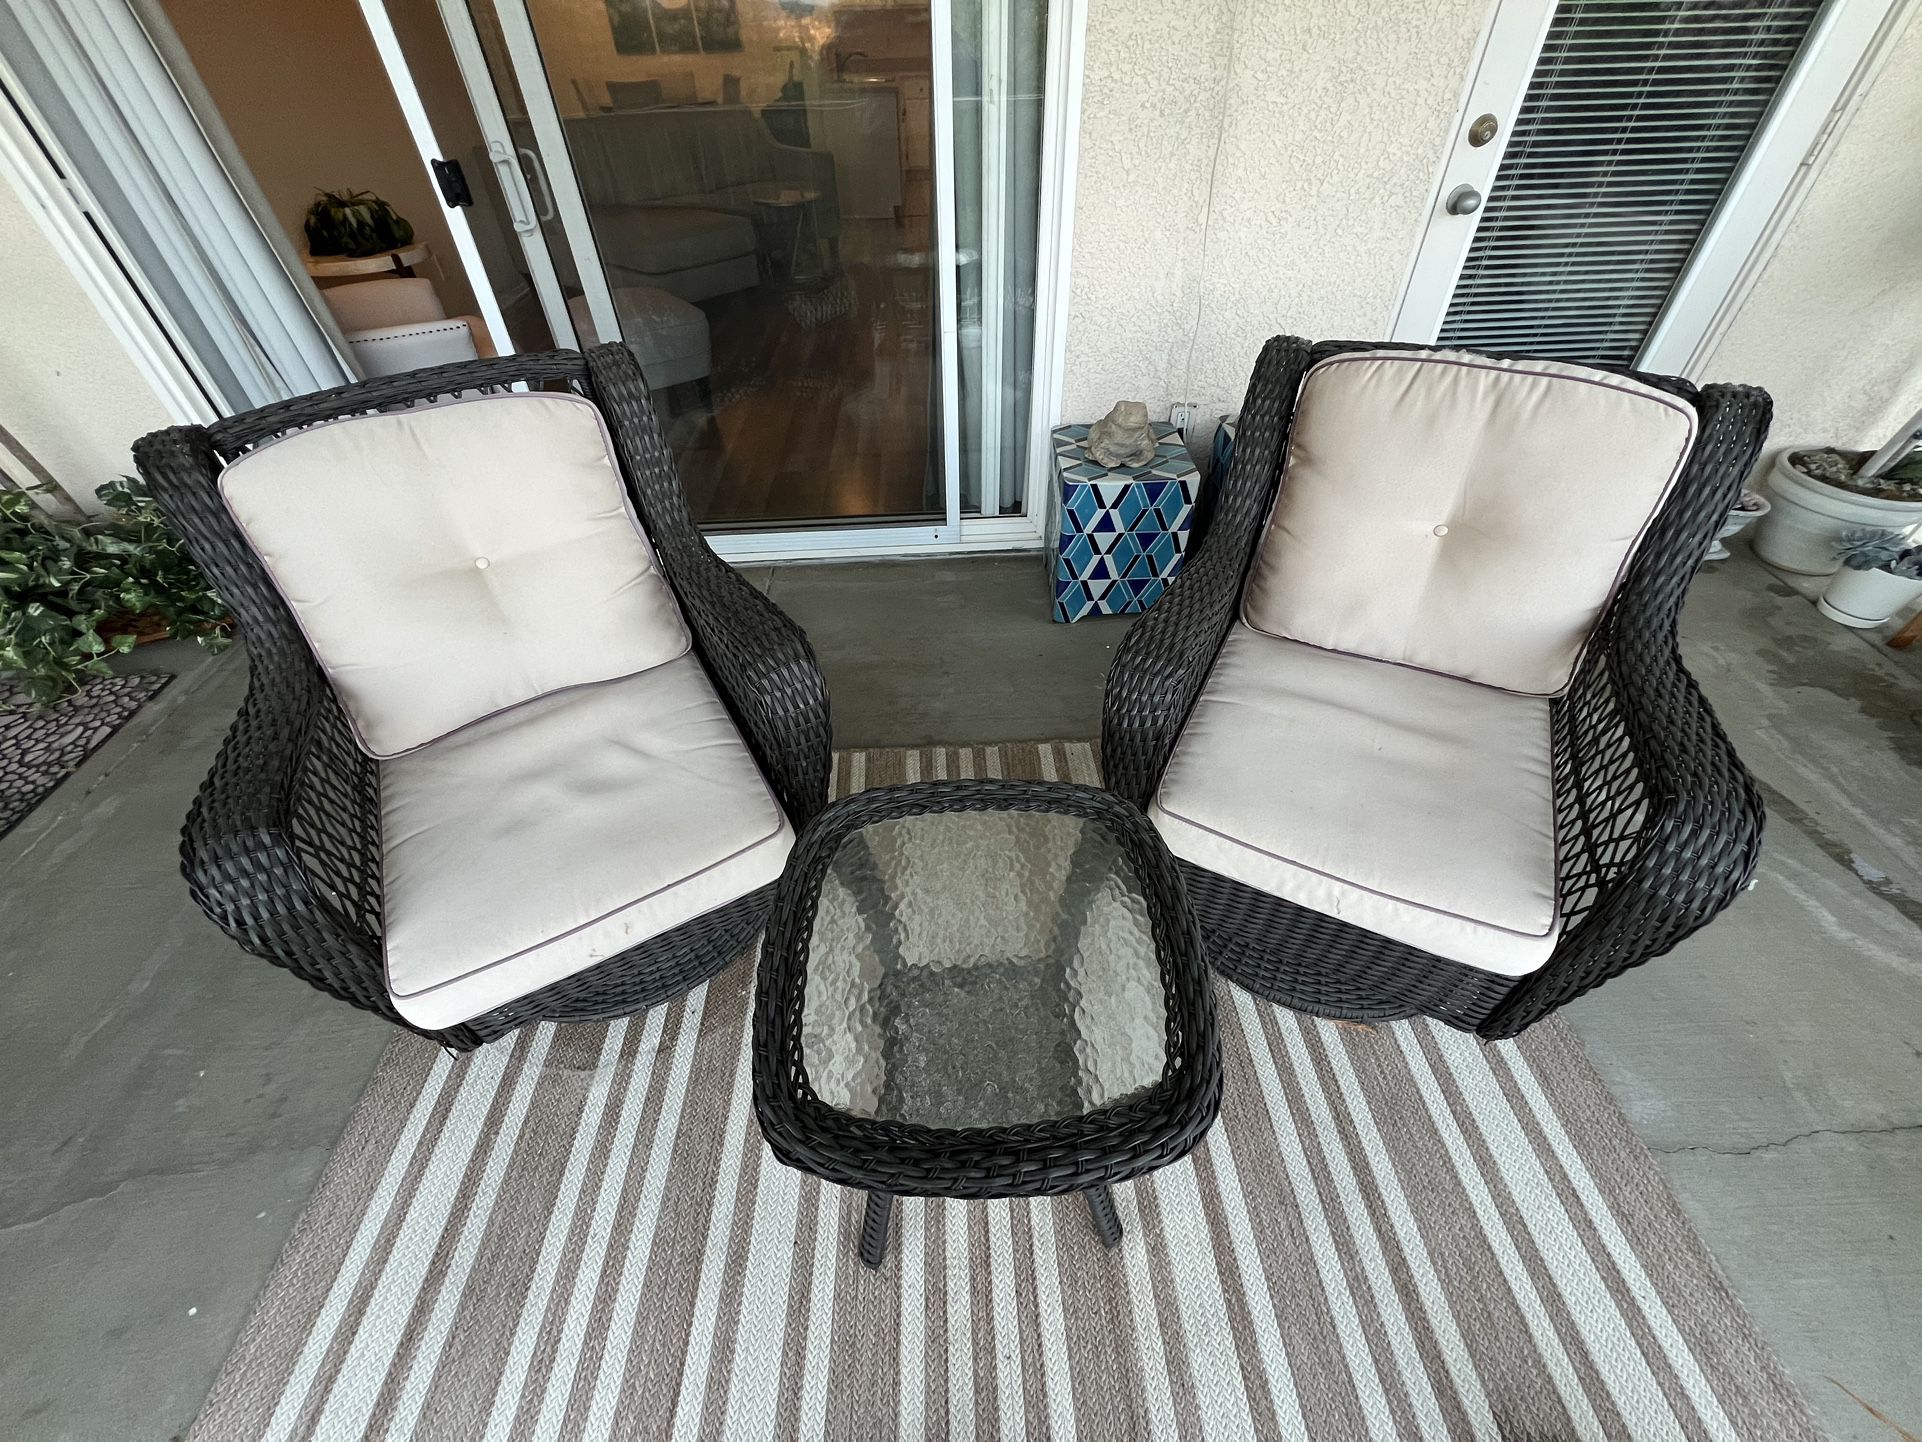 Wicker Rocking Patio Chairs With Cushions Plus Glass Table